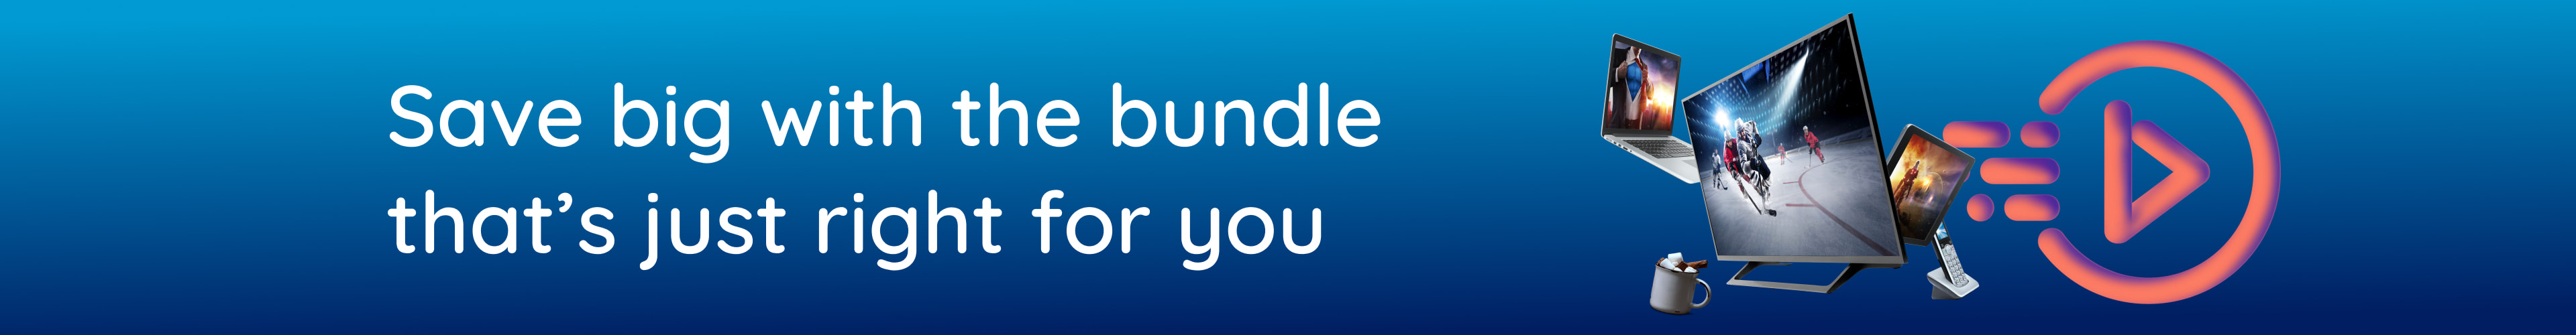 Save big with the bundle that’s just right for you.